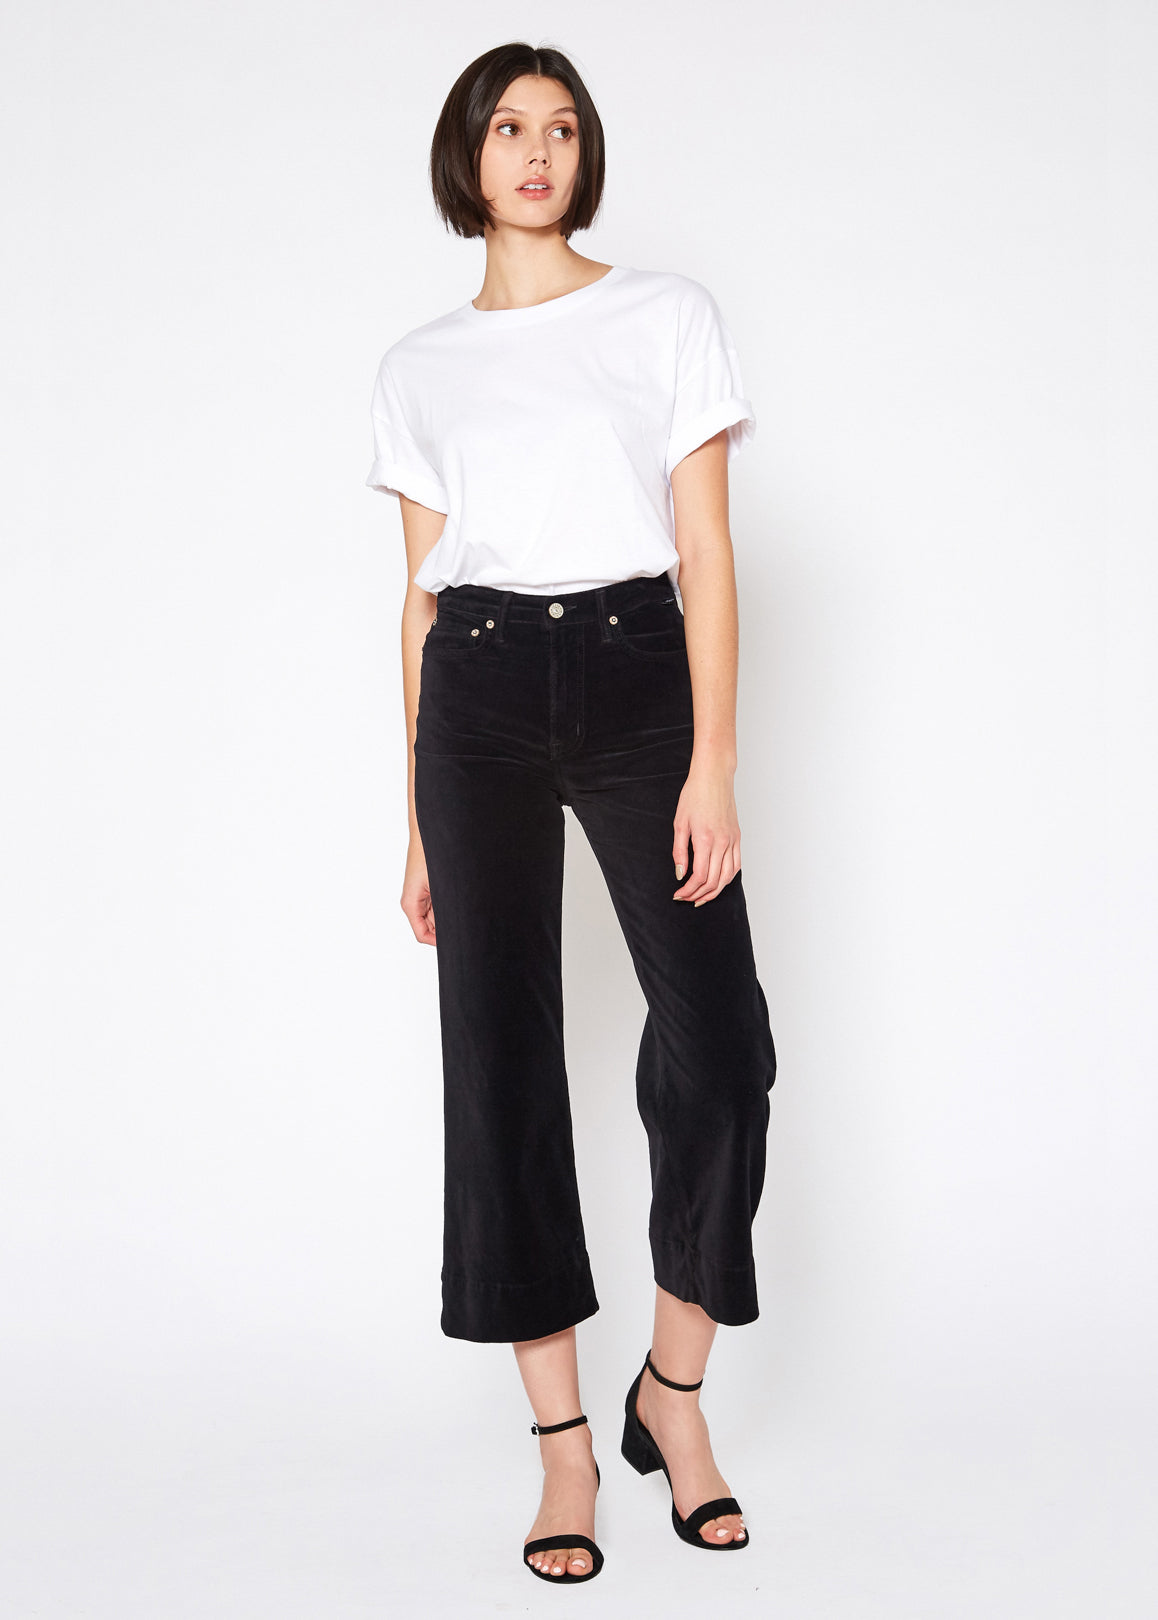 MARION - CULOTTE WIDE-LEGGED CROP (NIGHT OUT) - Noend Denim